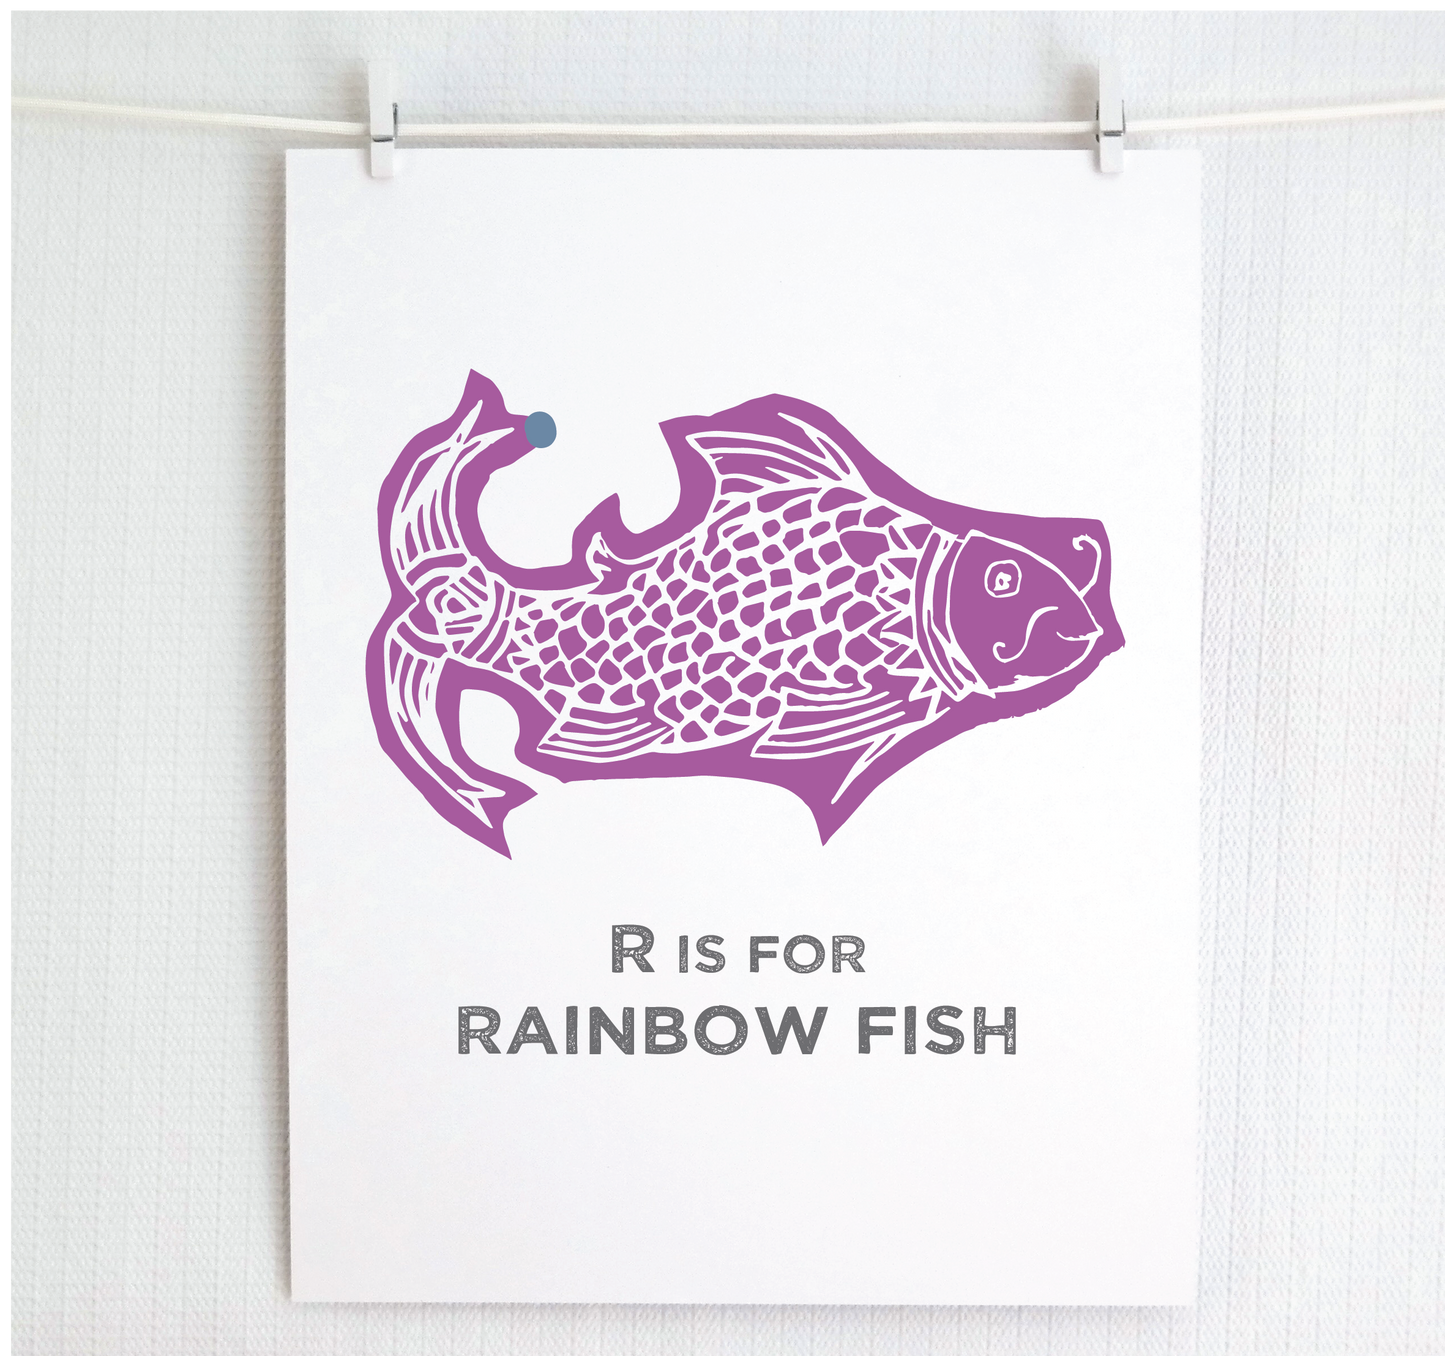 R is for Rainbow Fish